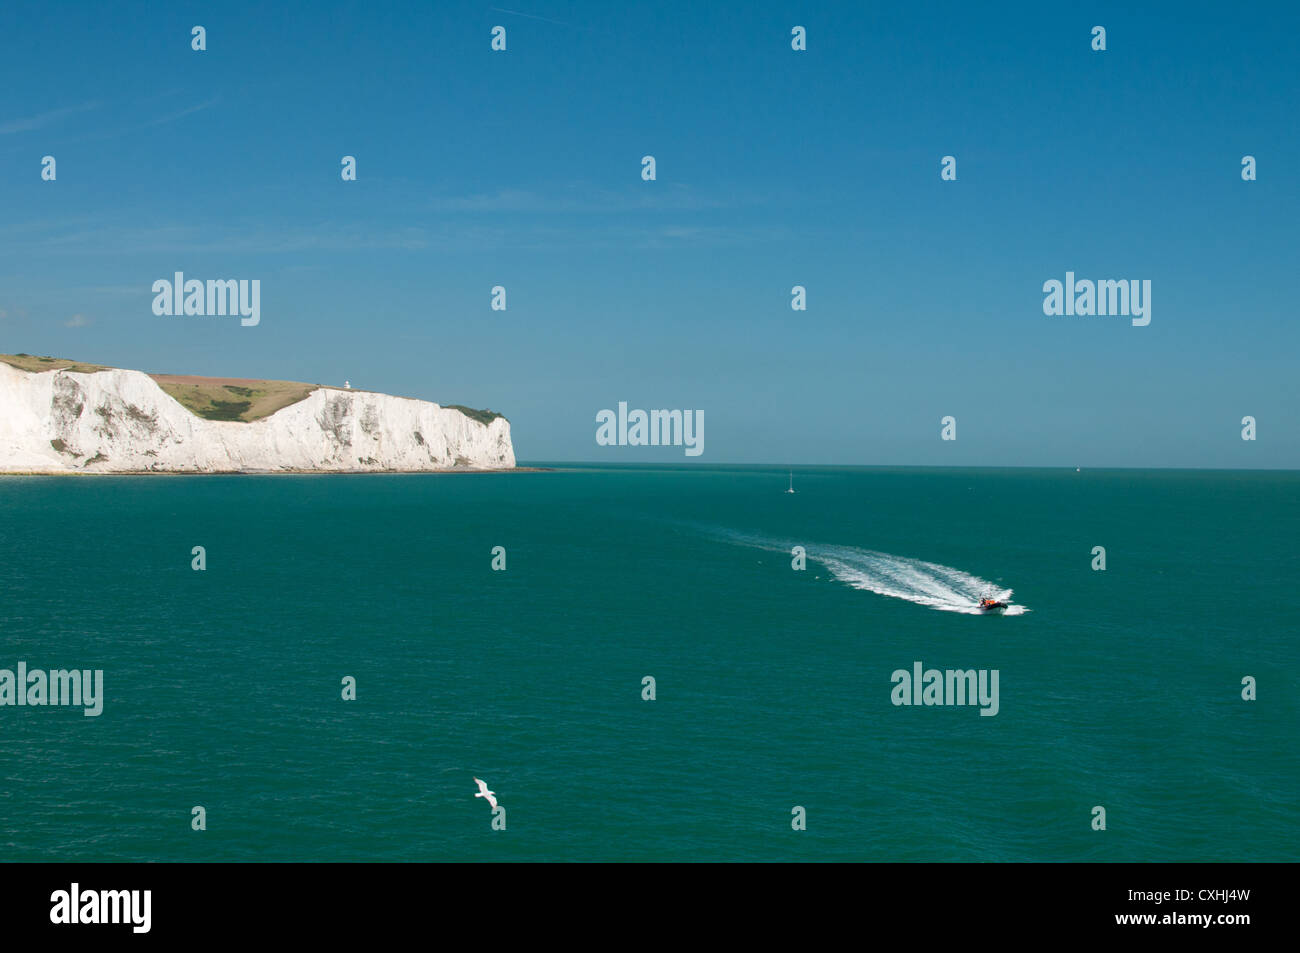 Speed boat in a English Channel by the white cliffs of Dover, Kent, England, UK. Stock Photo -